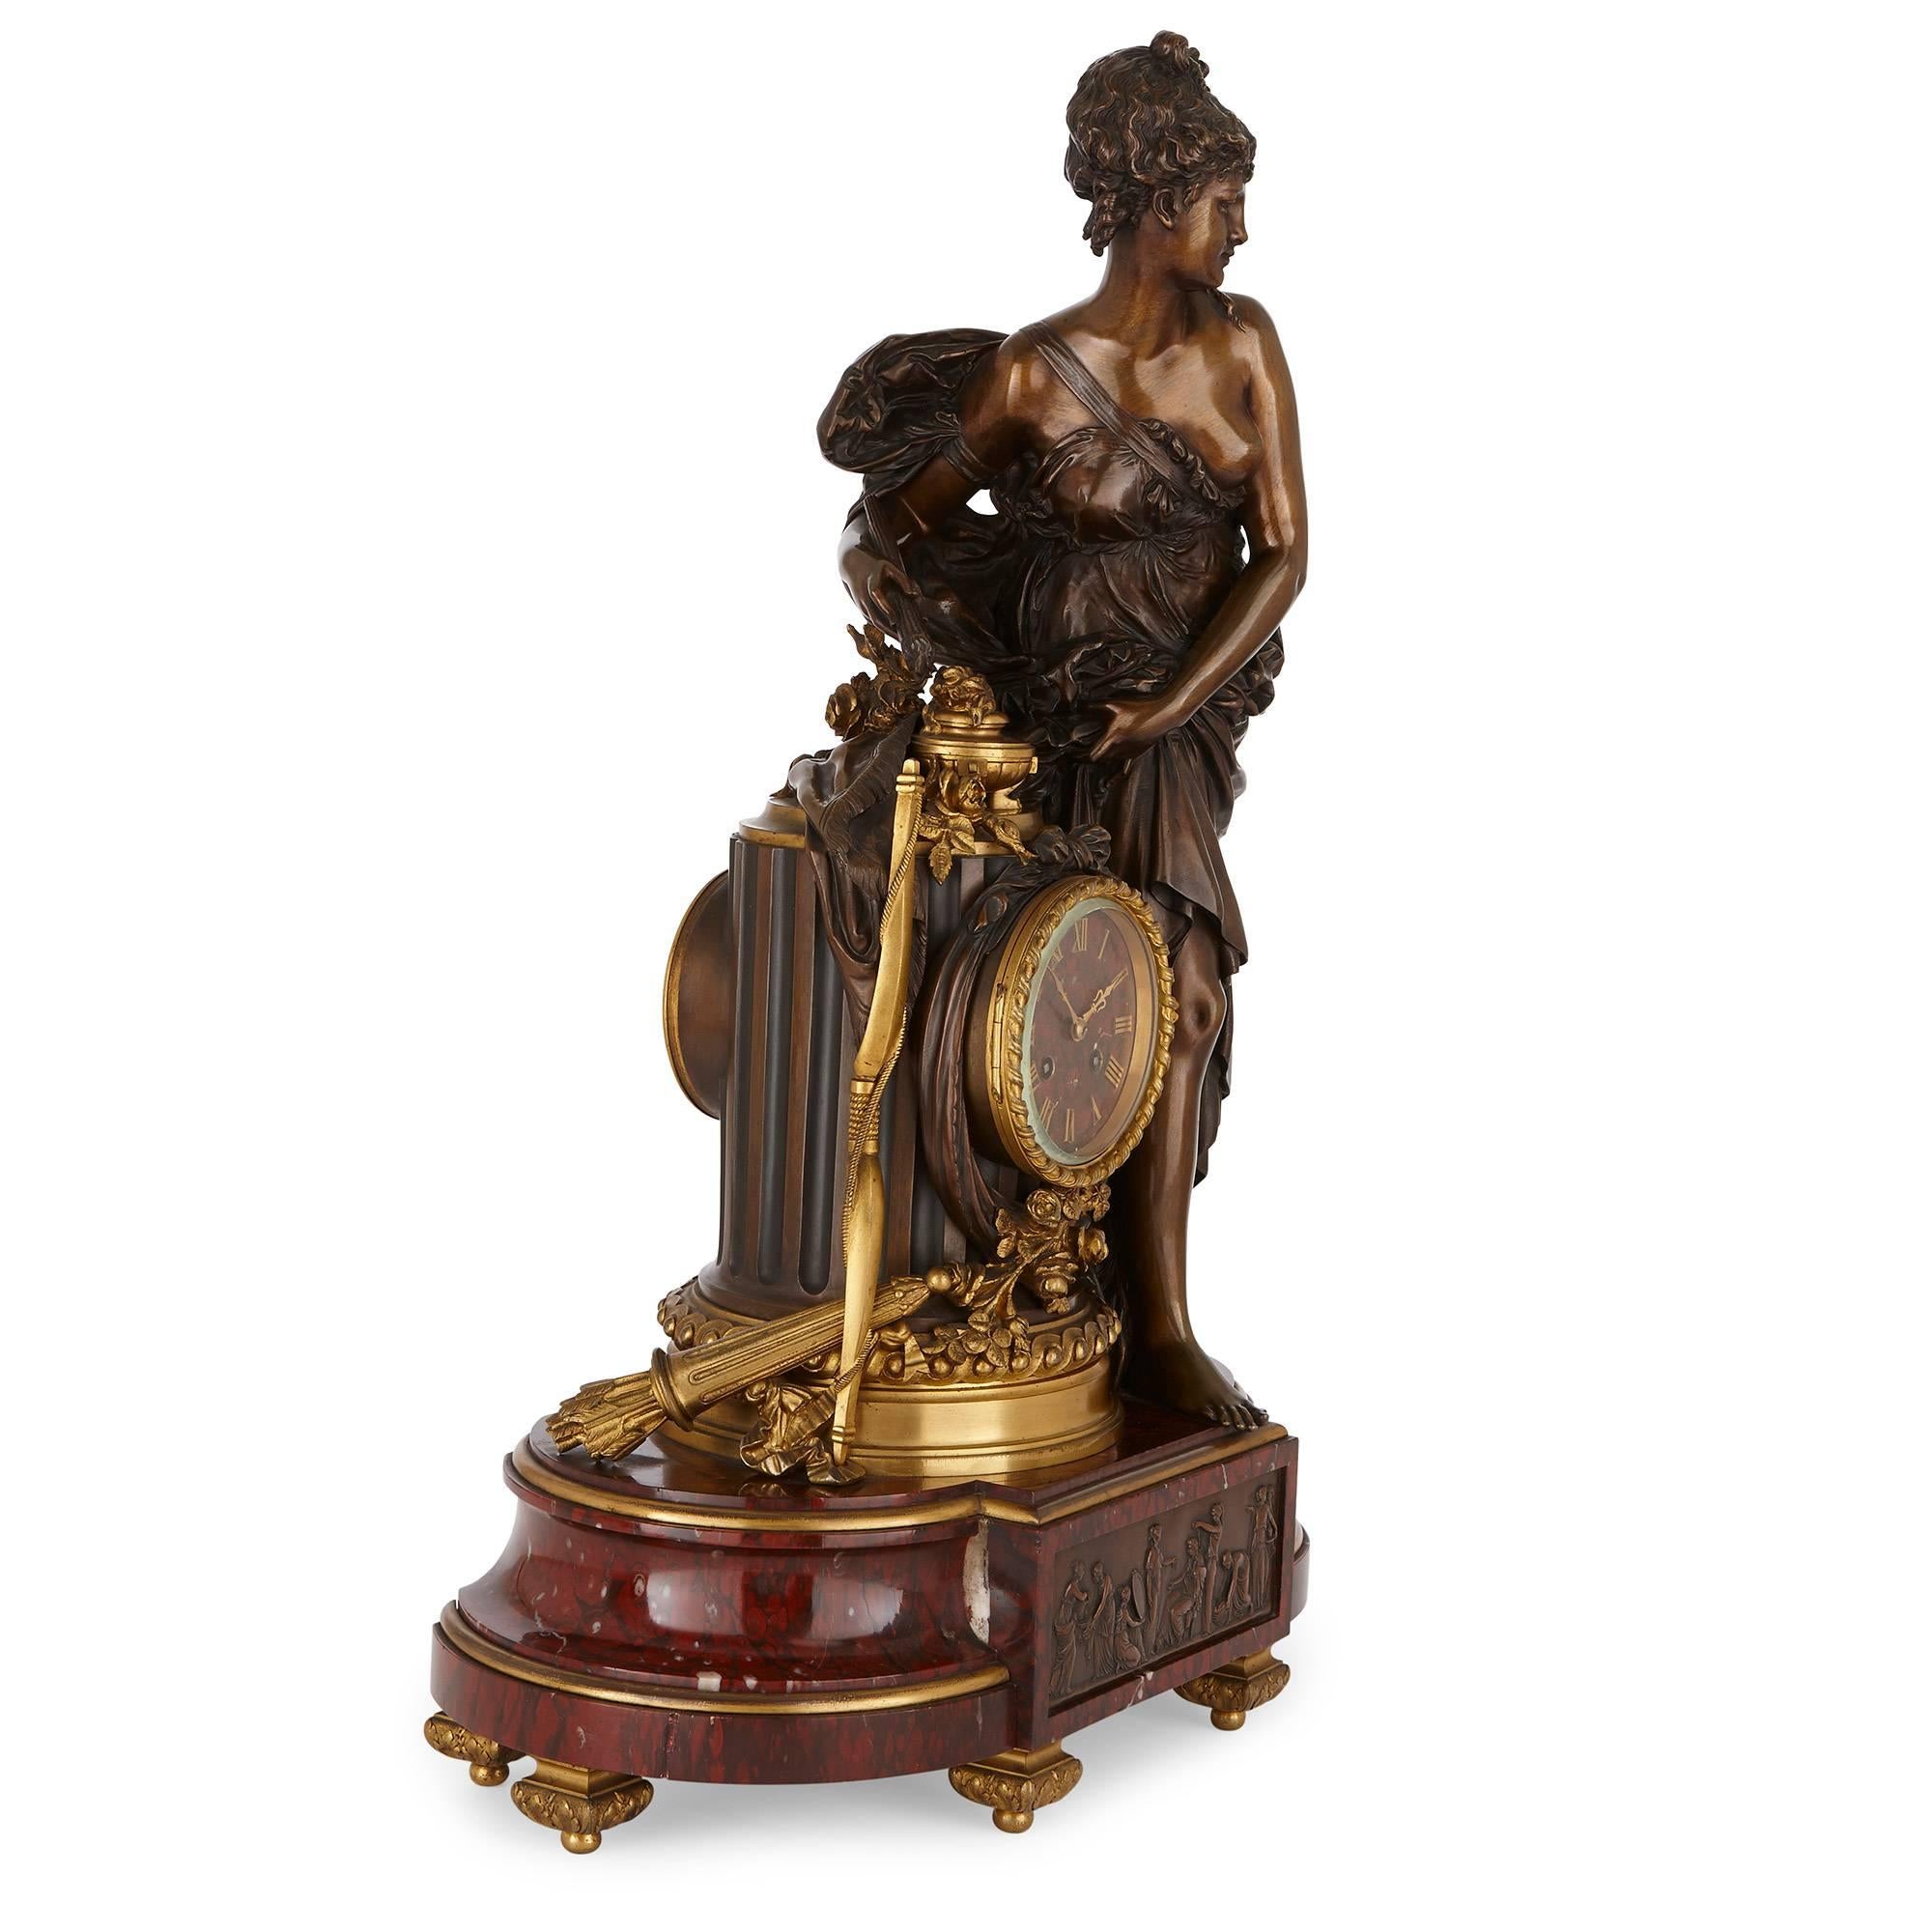 This fine clock set is crafted in patinated bronze, red marble and ornamented throughout with exquisite ormolu. It is the work of Lemerle-Charpentier & Cie, a French company highly celebrated for their superlative clock sets and garnitures.
The set